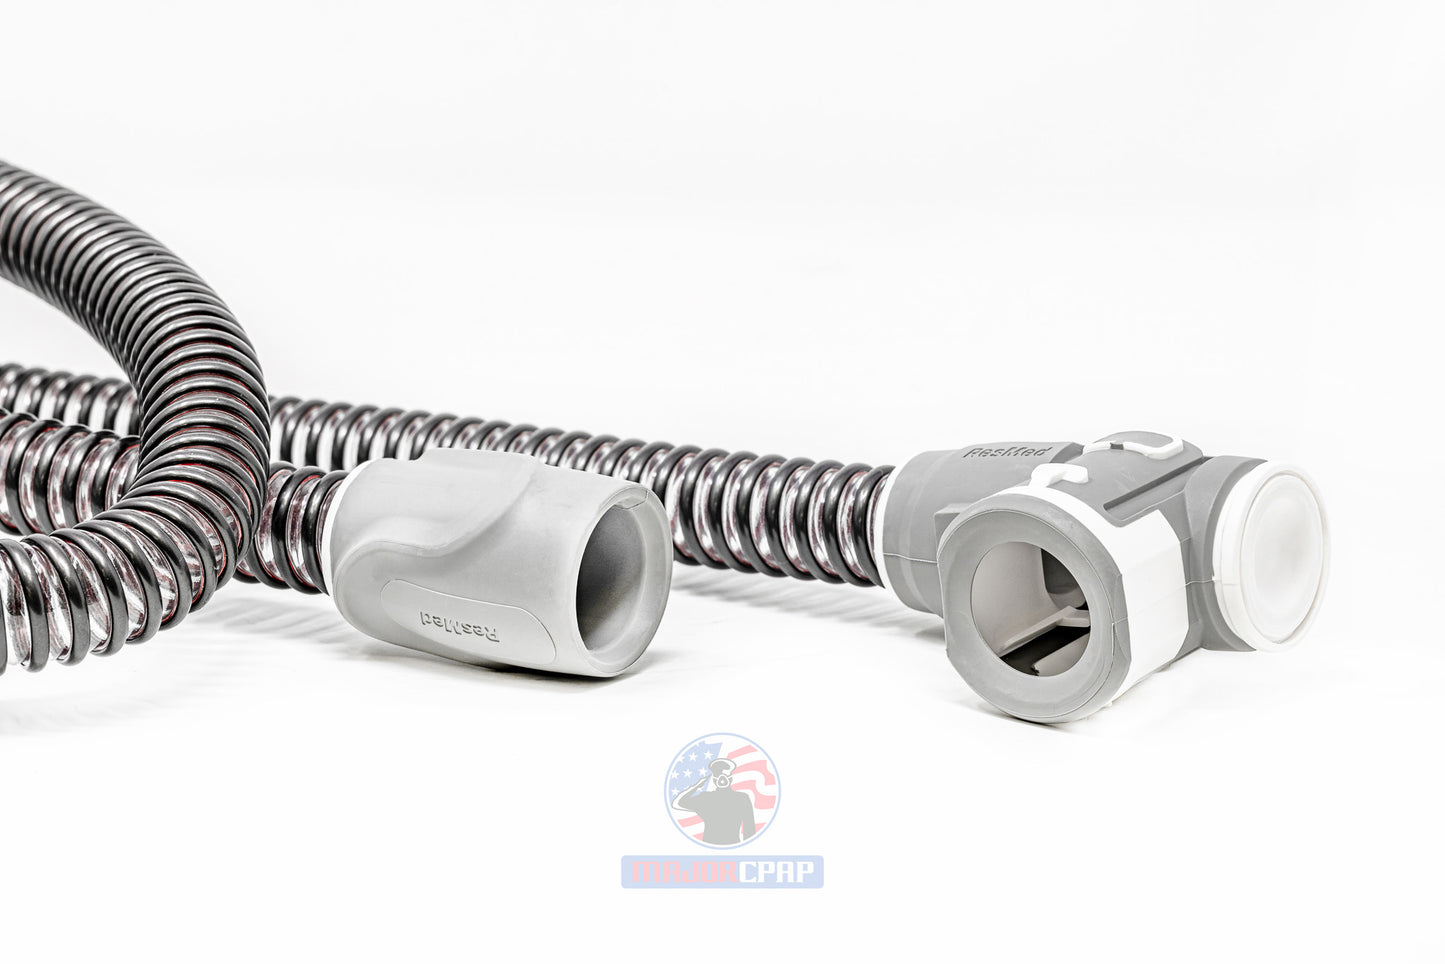 ResMed ClimateLineAir Heated Tube For AirSense/AirCurve 10 Machines